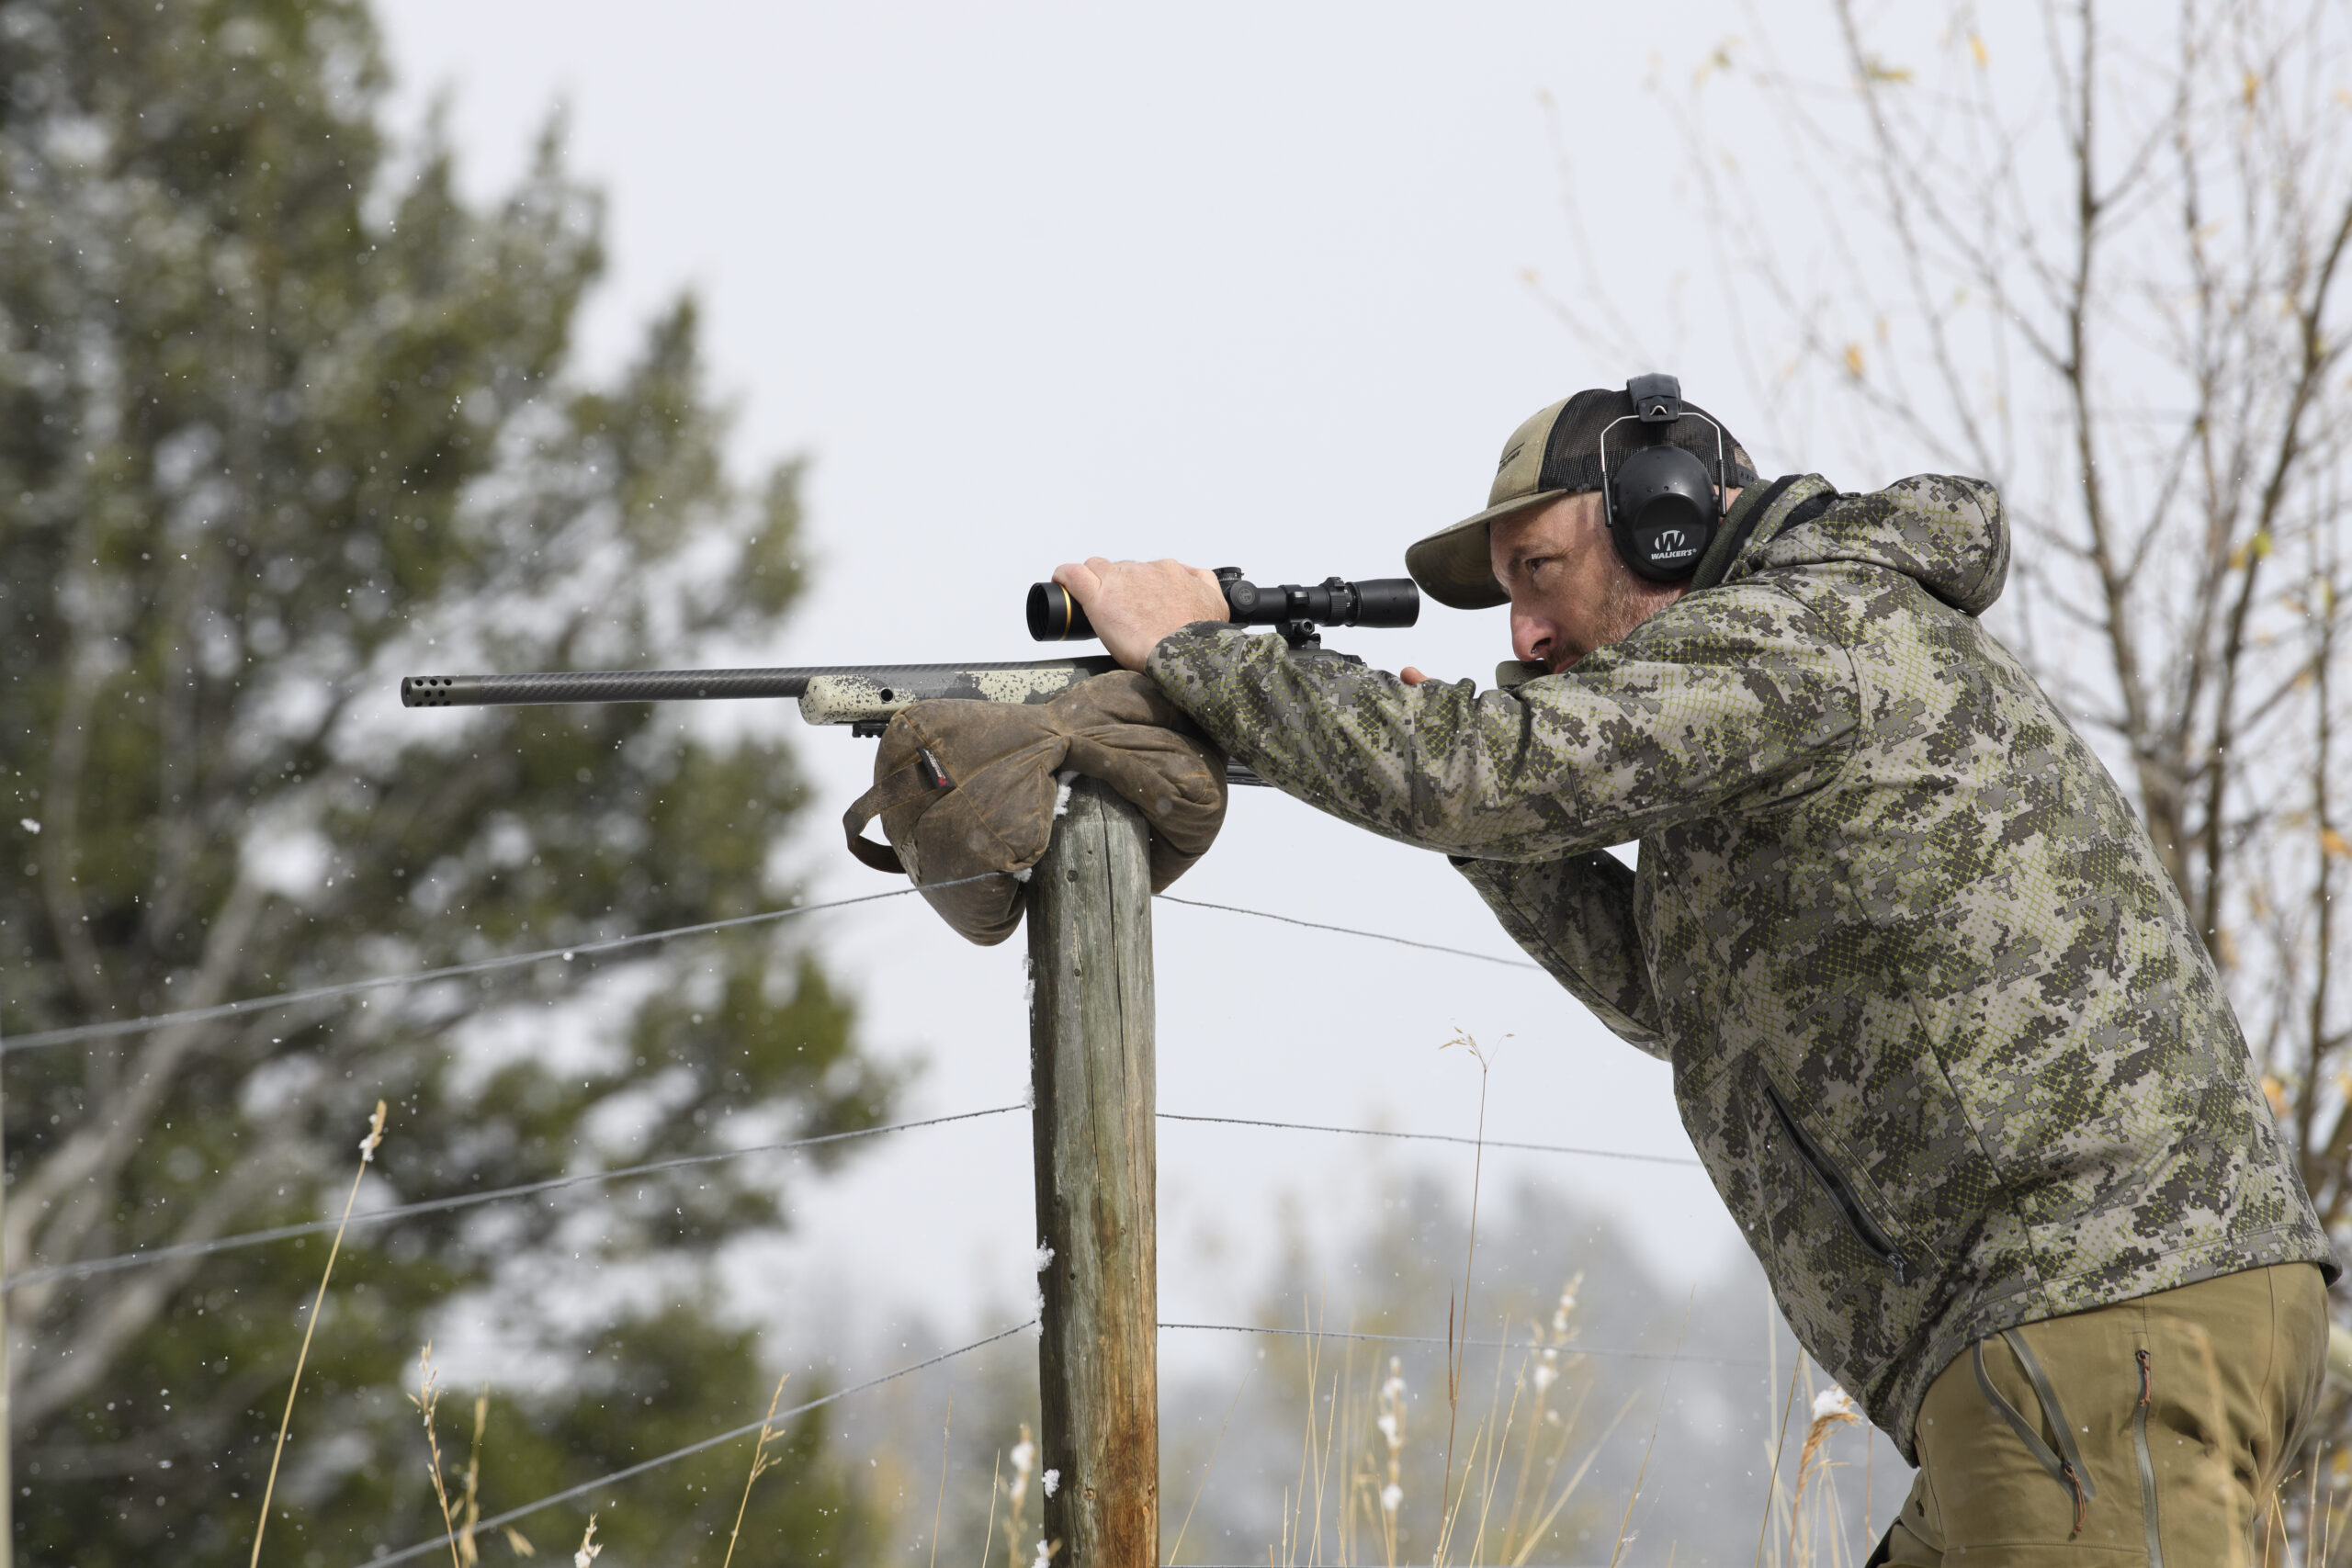 A Western hunter readies himself for a shot behind his bolt-action rifle, which is resting on a fence post.